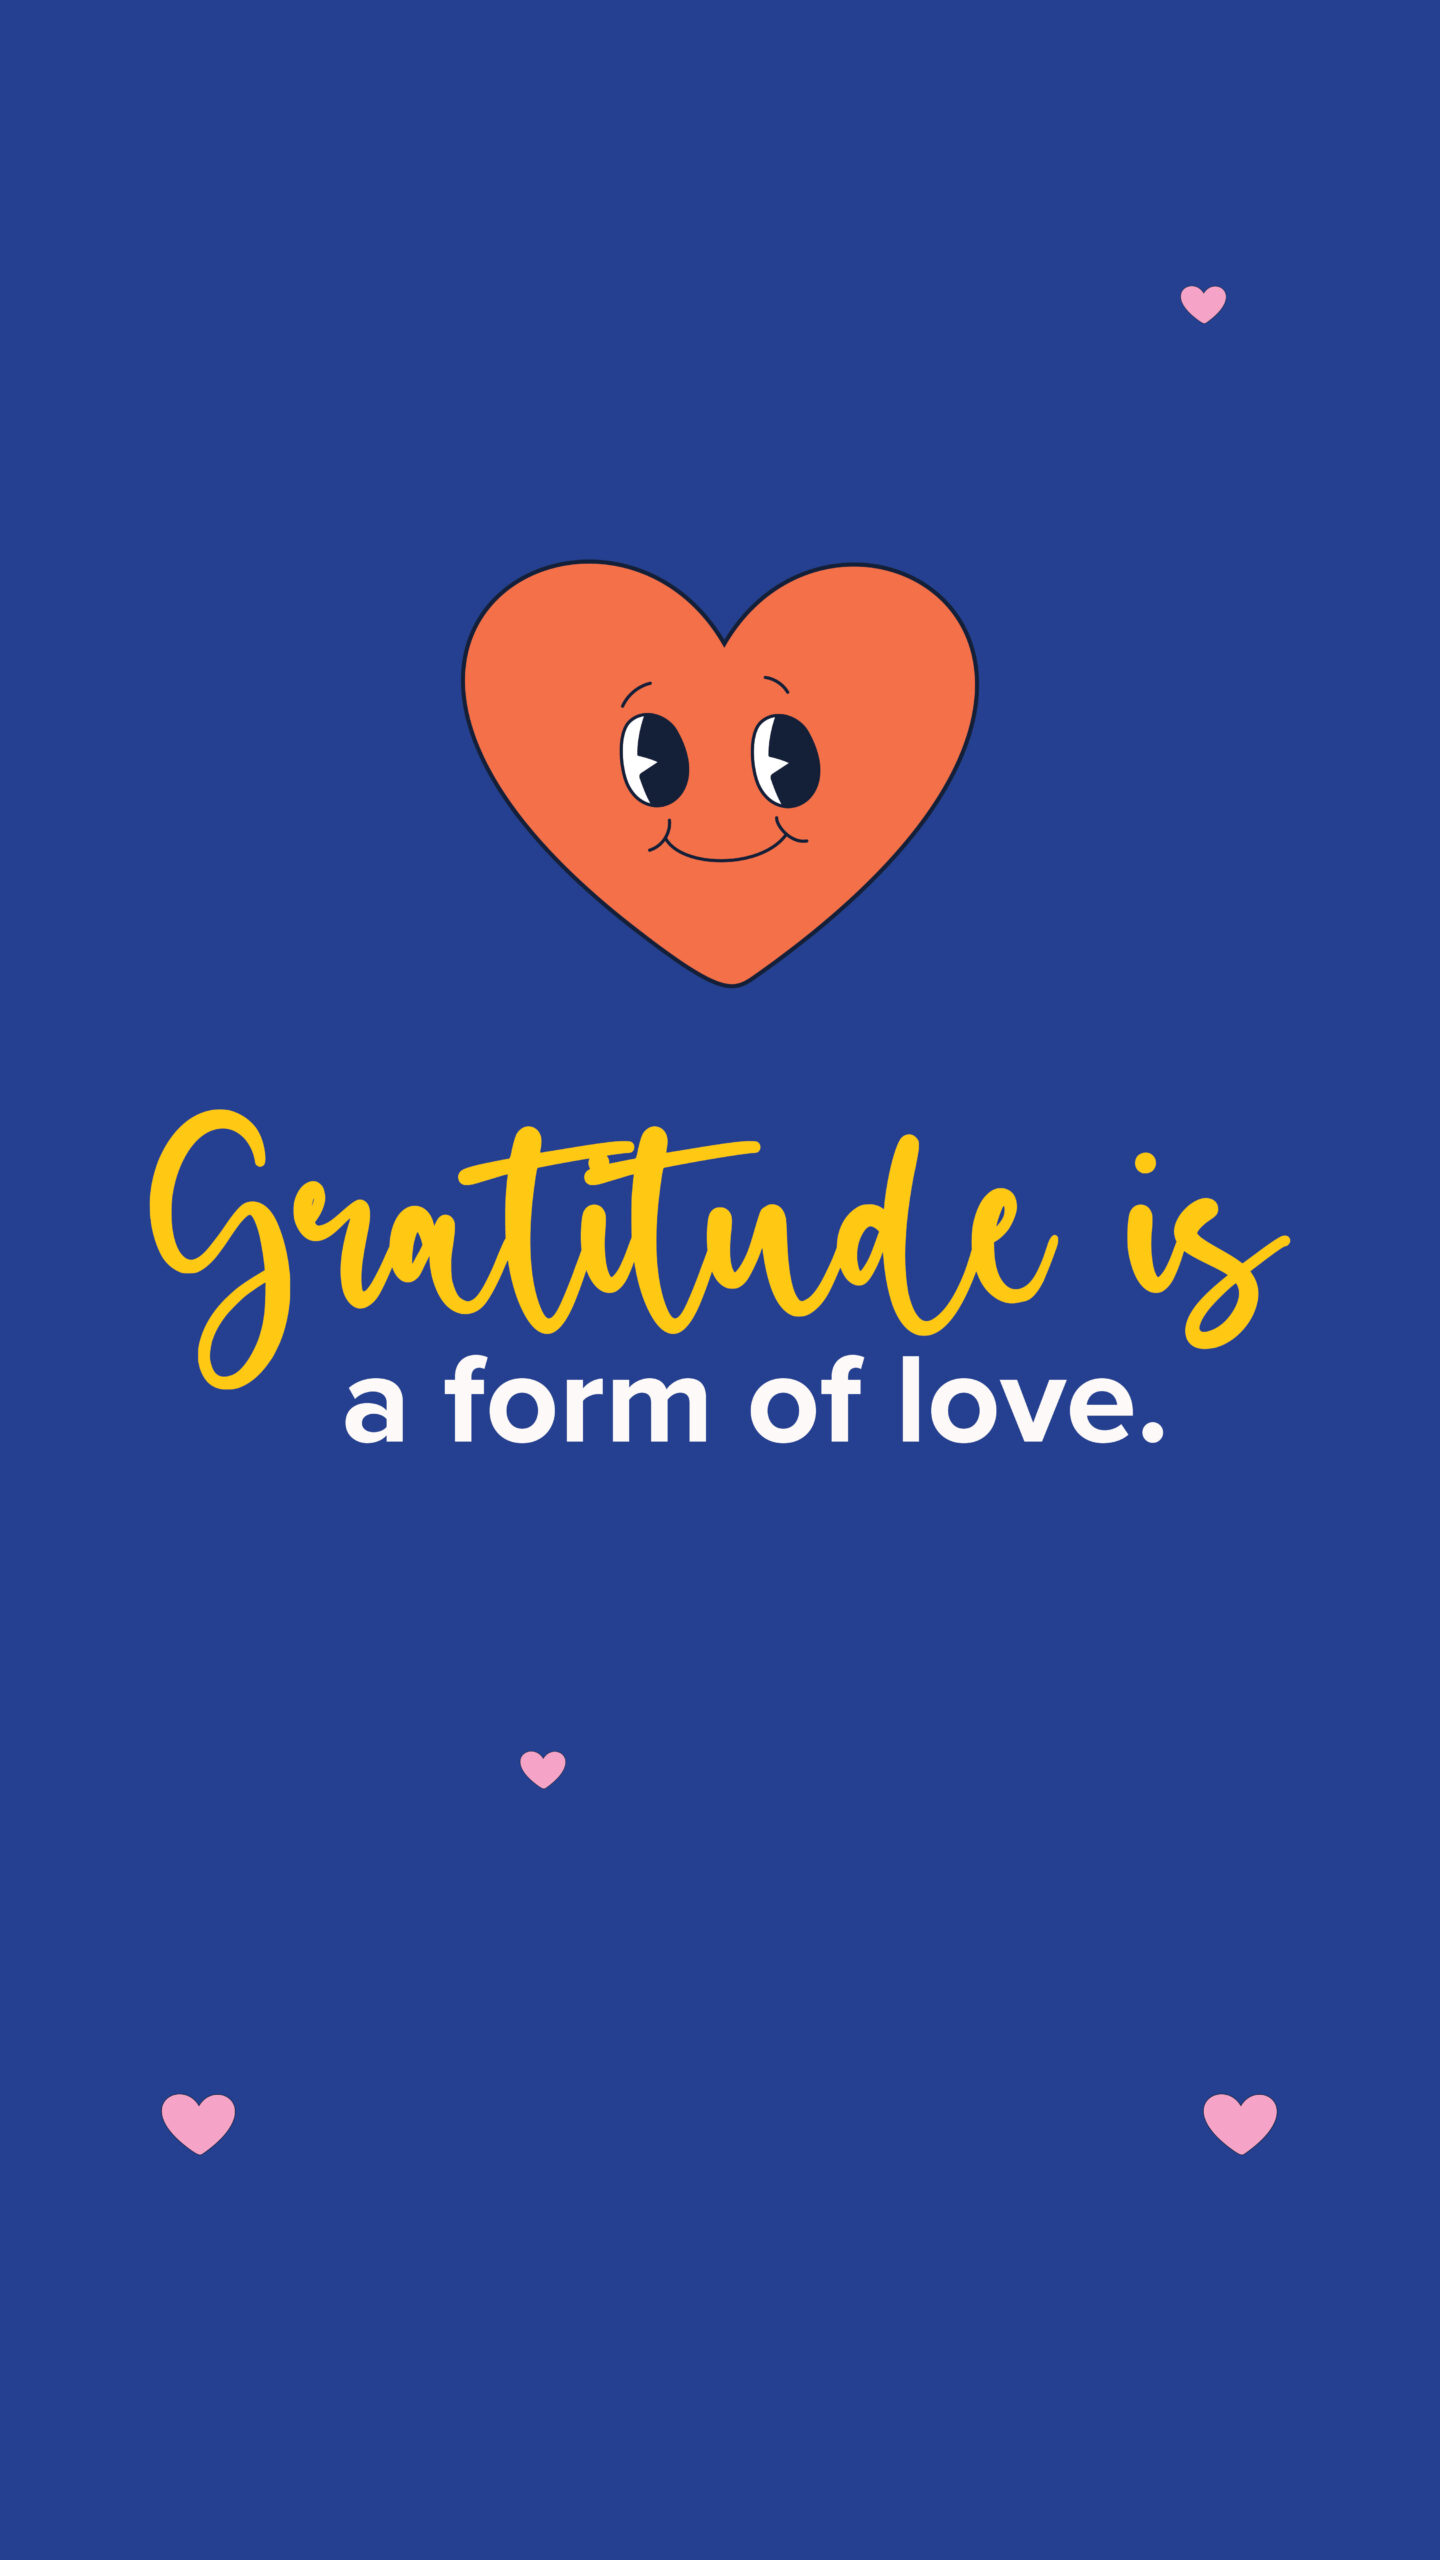 Gratitude is a form of love. with a heart graphics